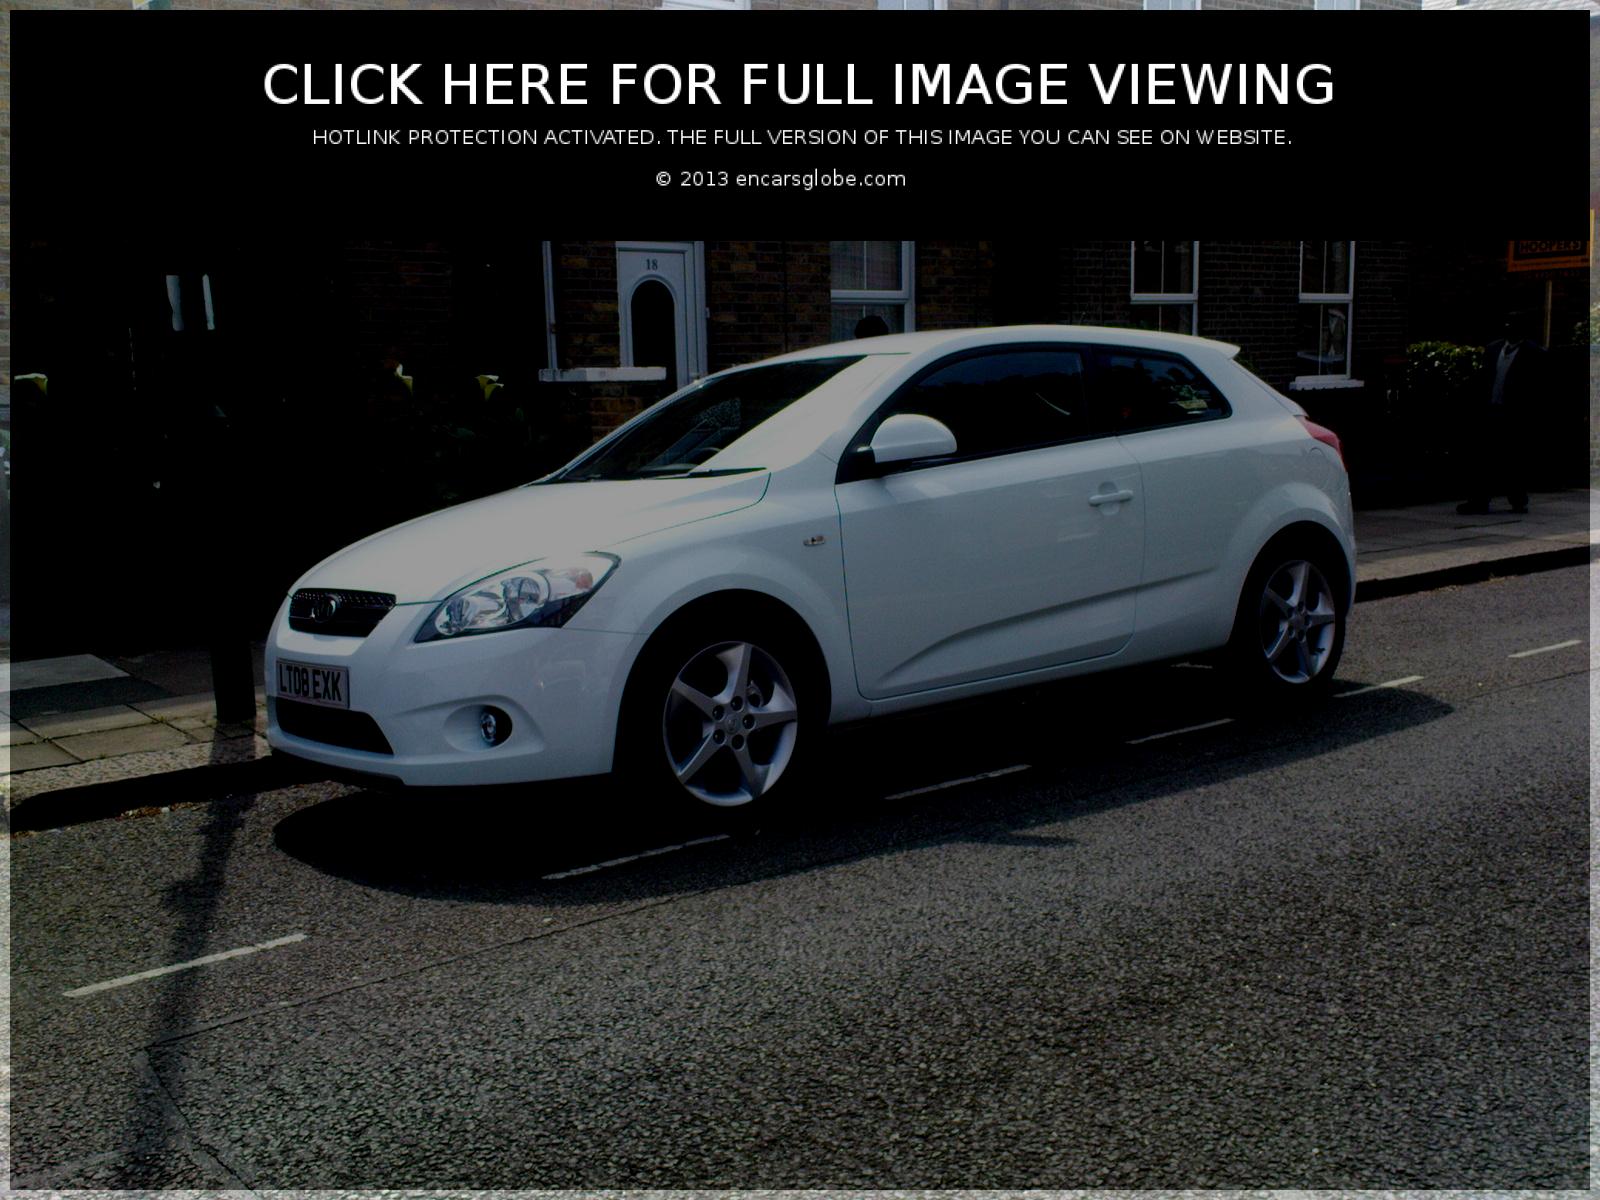 Kia Pro Cee`d 16 Photo Gallery: Photo #01 out of 11, Image Size ...